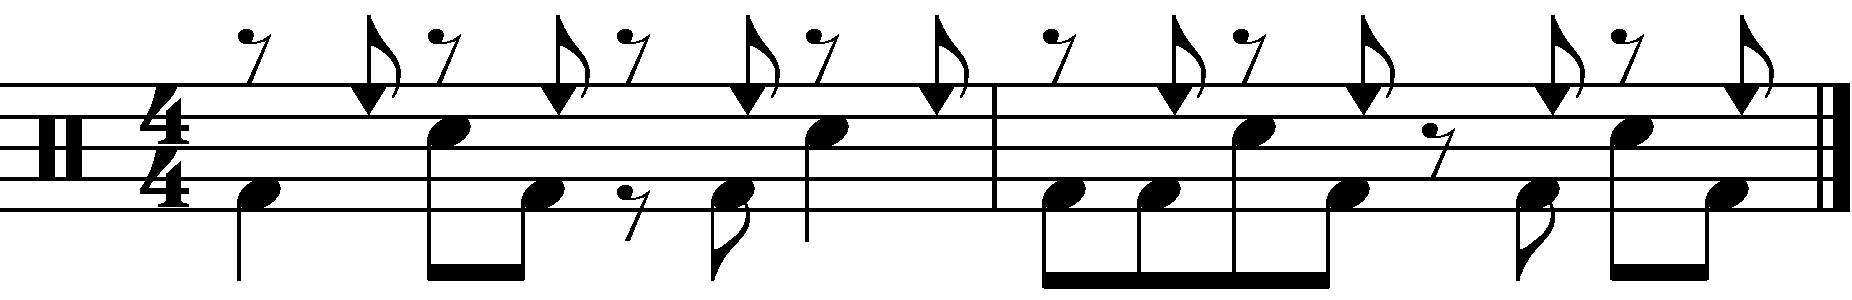 A groove with the right hand played on a cowbell